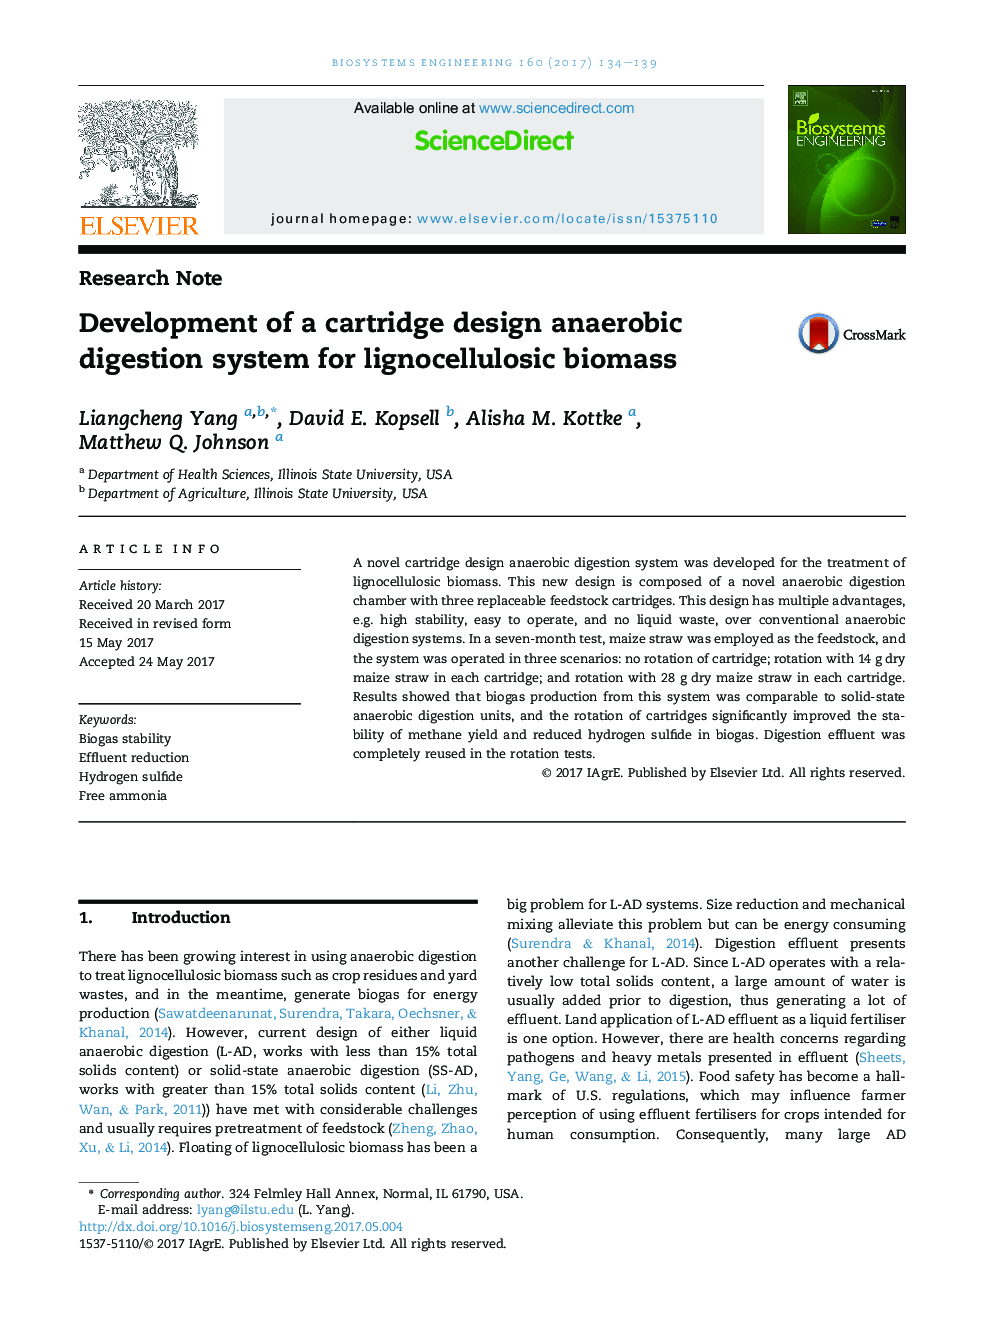 Development of a cartridge design anaerobic digestion system for lignocellulosic biomass